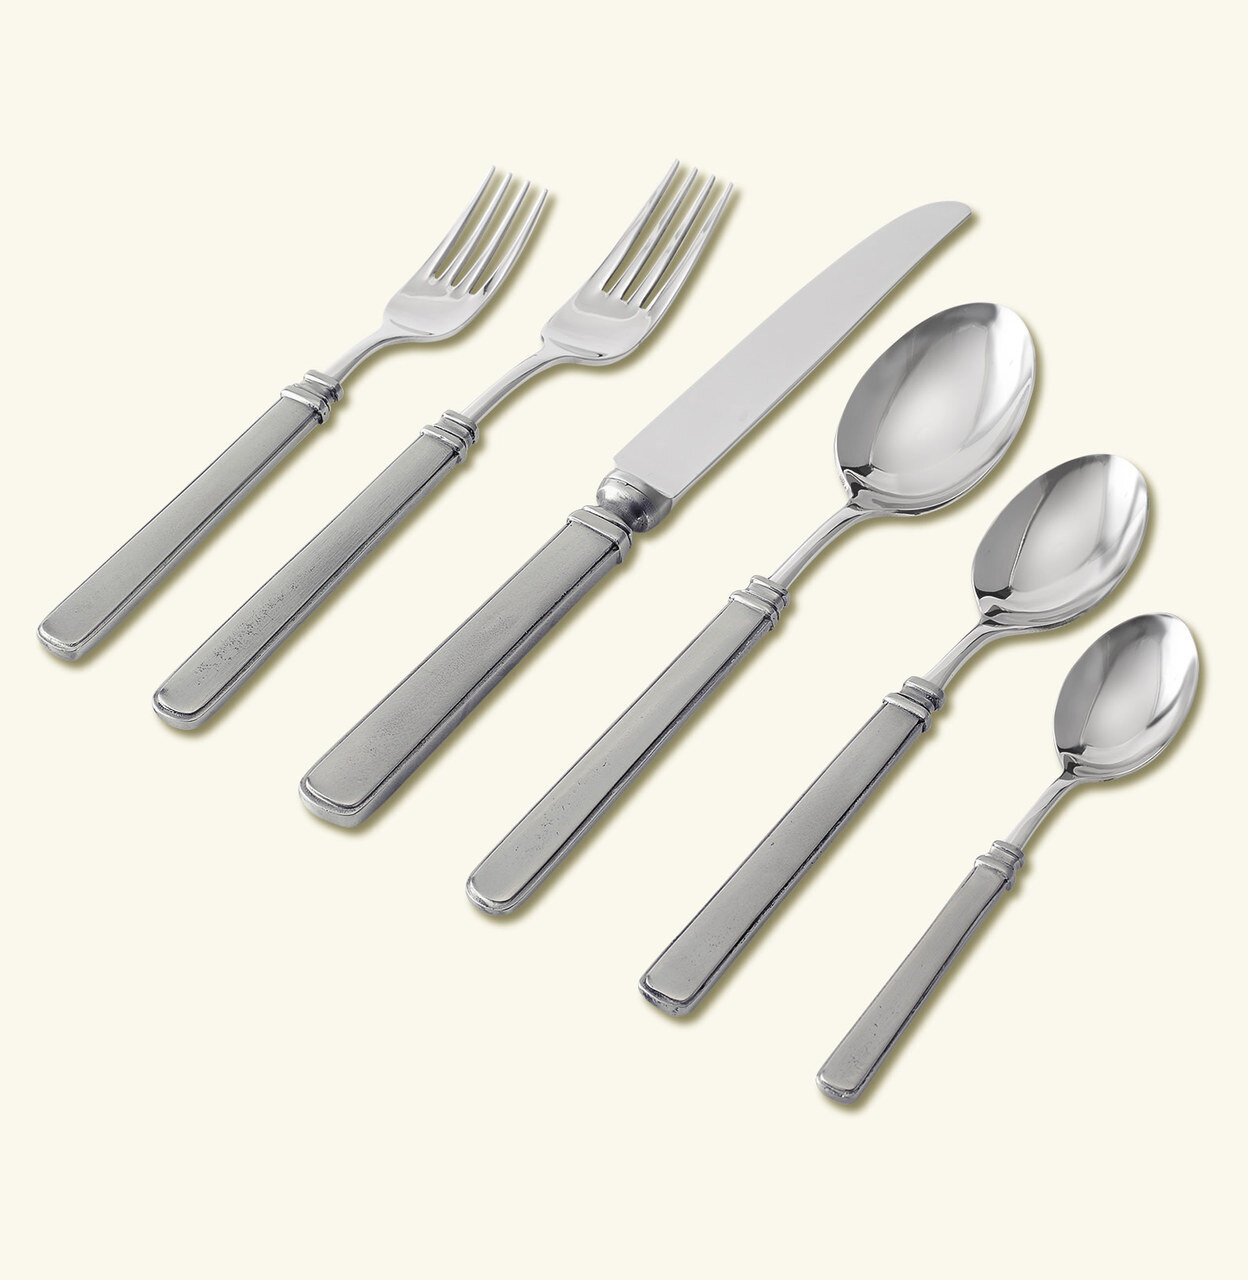 Match Pewter Gabriella 6 Piece Place Setting With Forged Knife